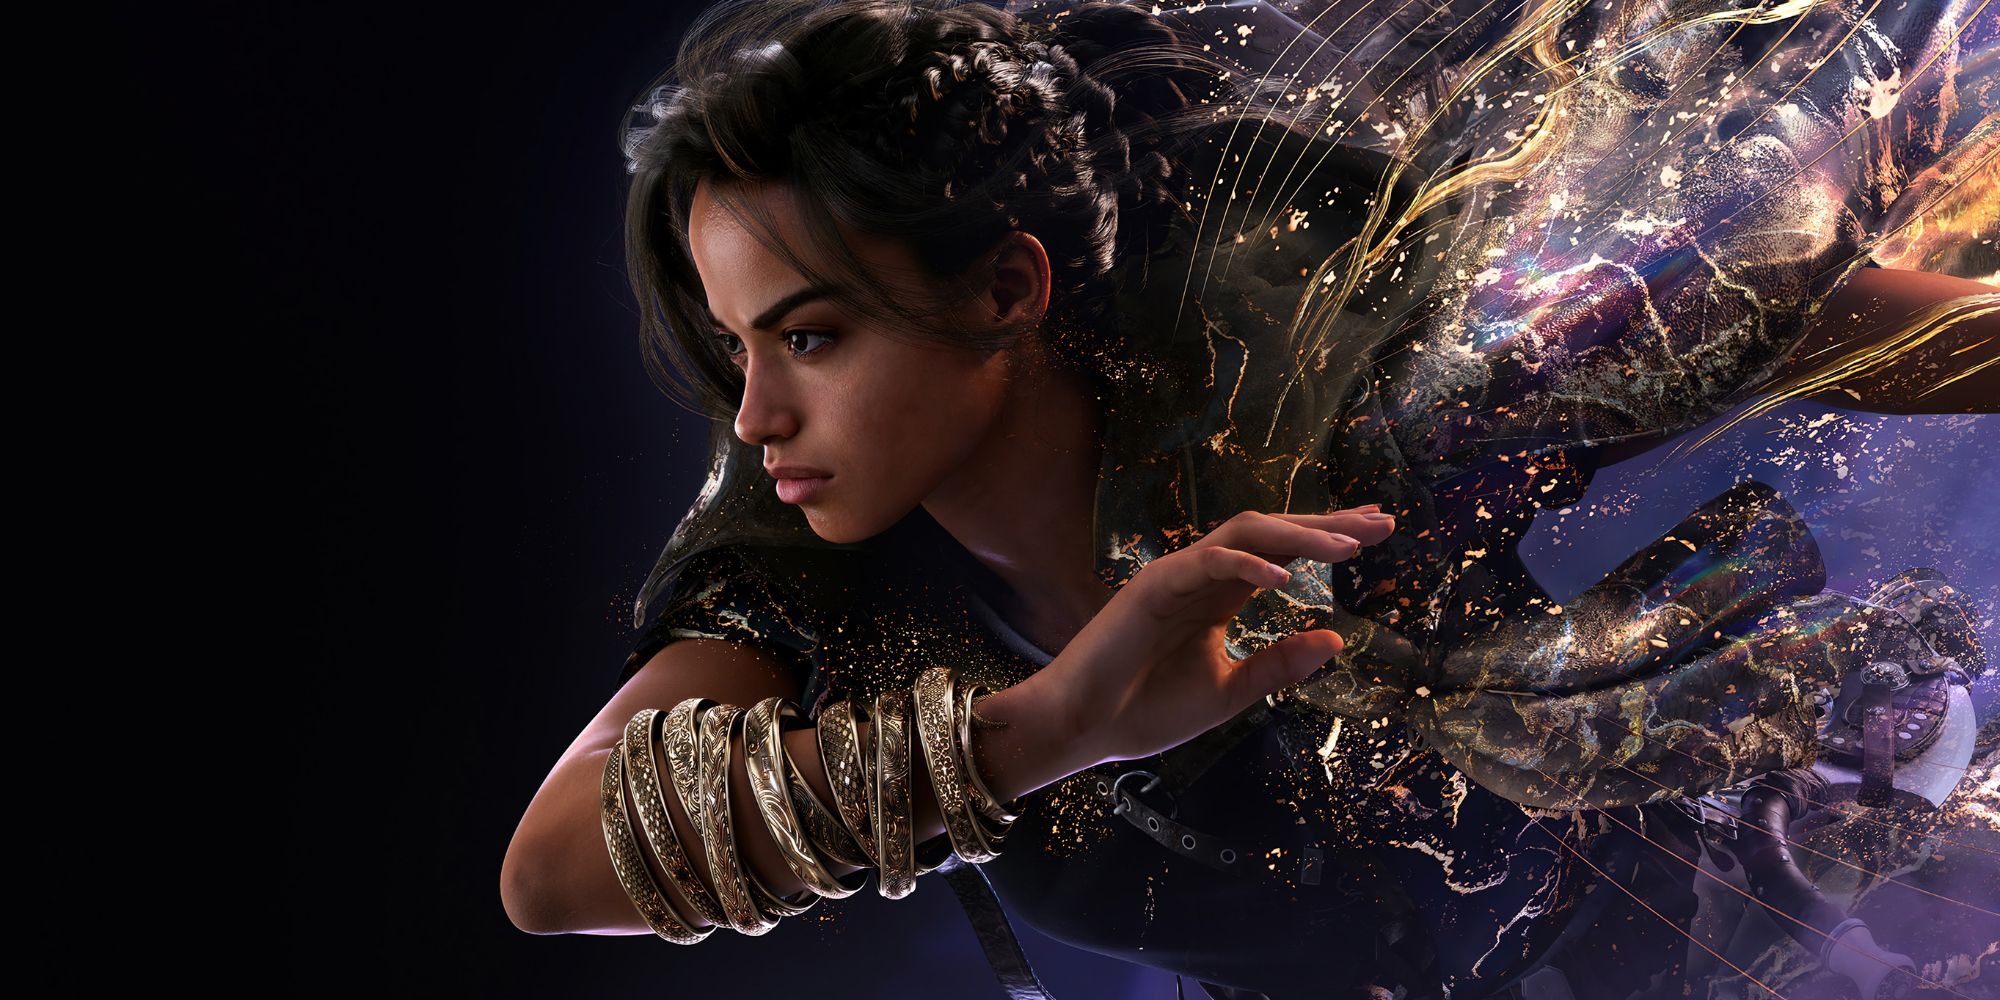 Key art for Forspoken, showing Frey wearing Cuff and surrounded by her signature purple magic.